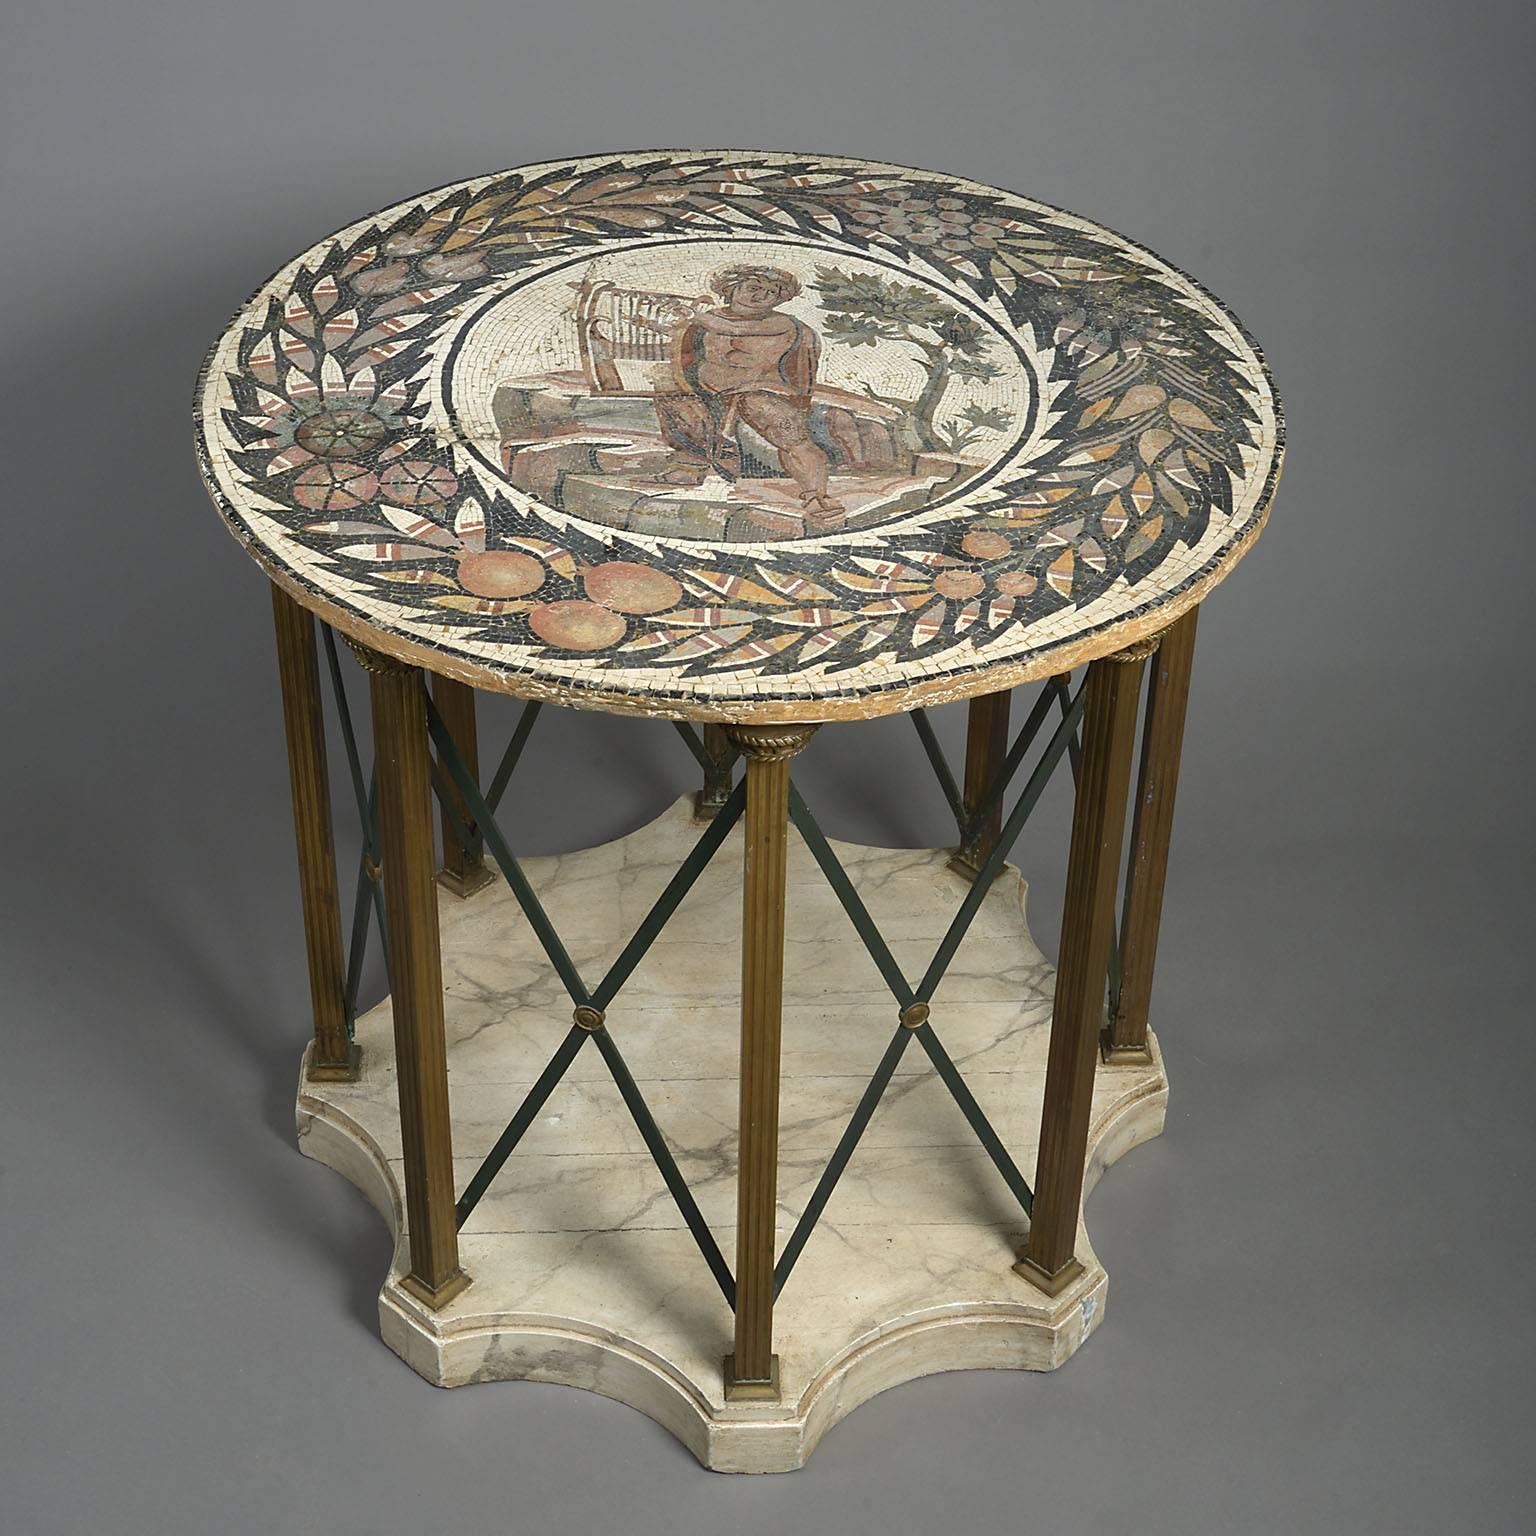 20th century mosaic top centre table
A very stylish and unusual early 20th century centre table. The brass legs with crossed stretchers on a marbled wood platform base supporting a mosaic top. The central medallion depicting a scene of Orpheus